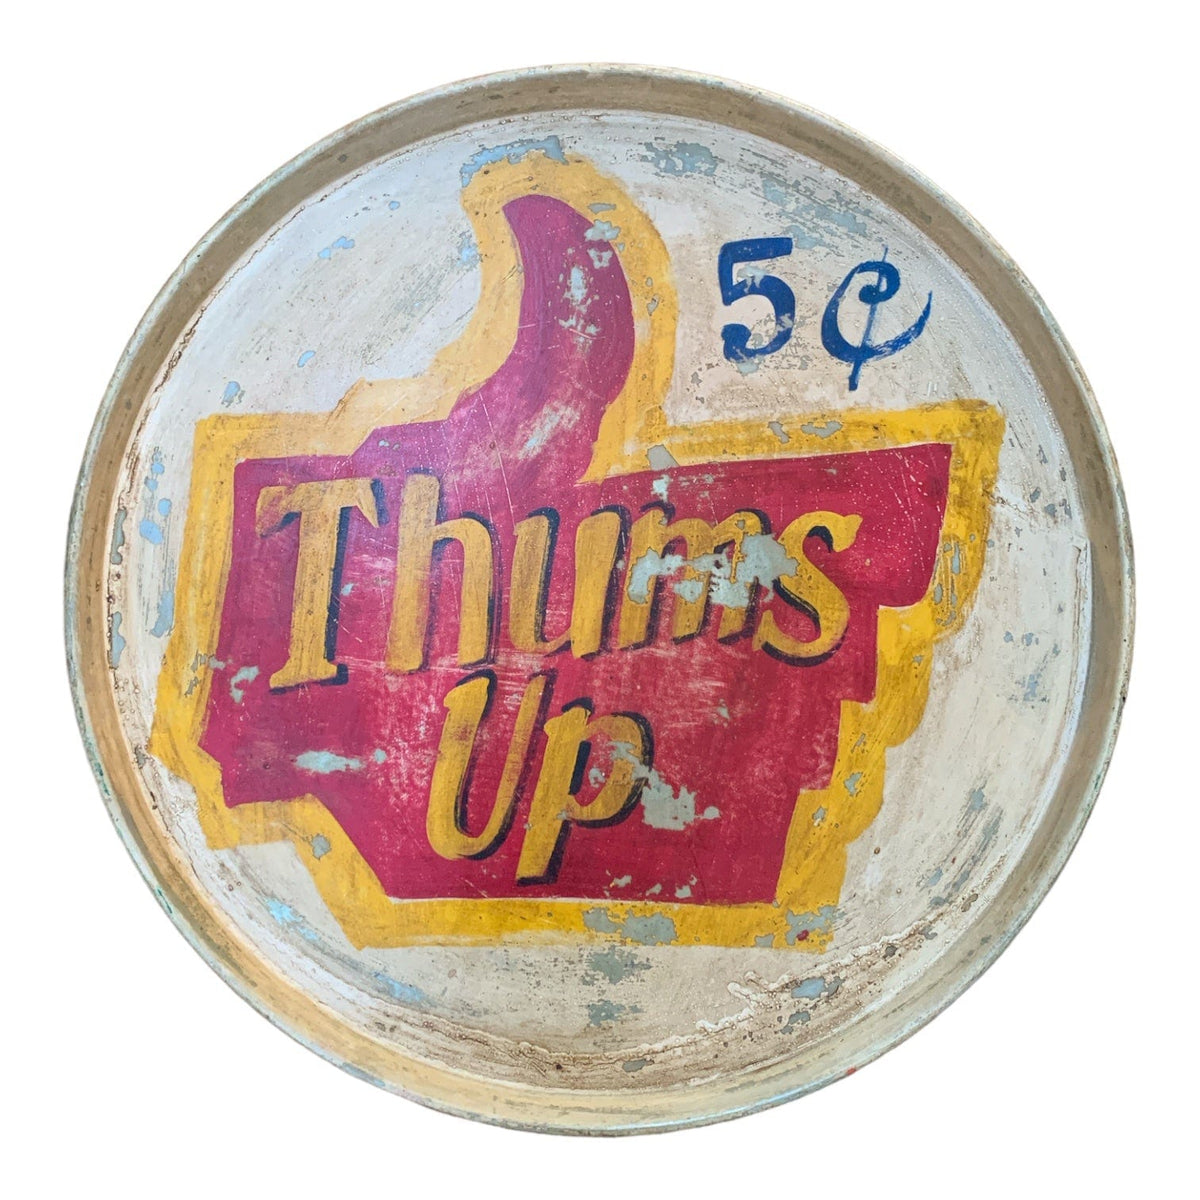 Oatmeal-Thums-Up-Vintage-Round-Tray-Little-and-Fox